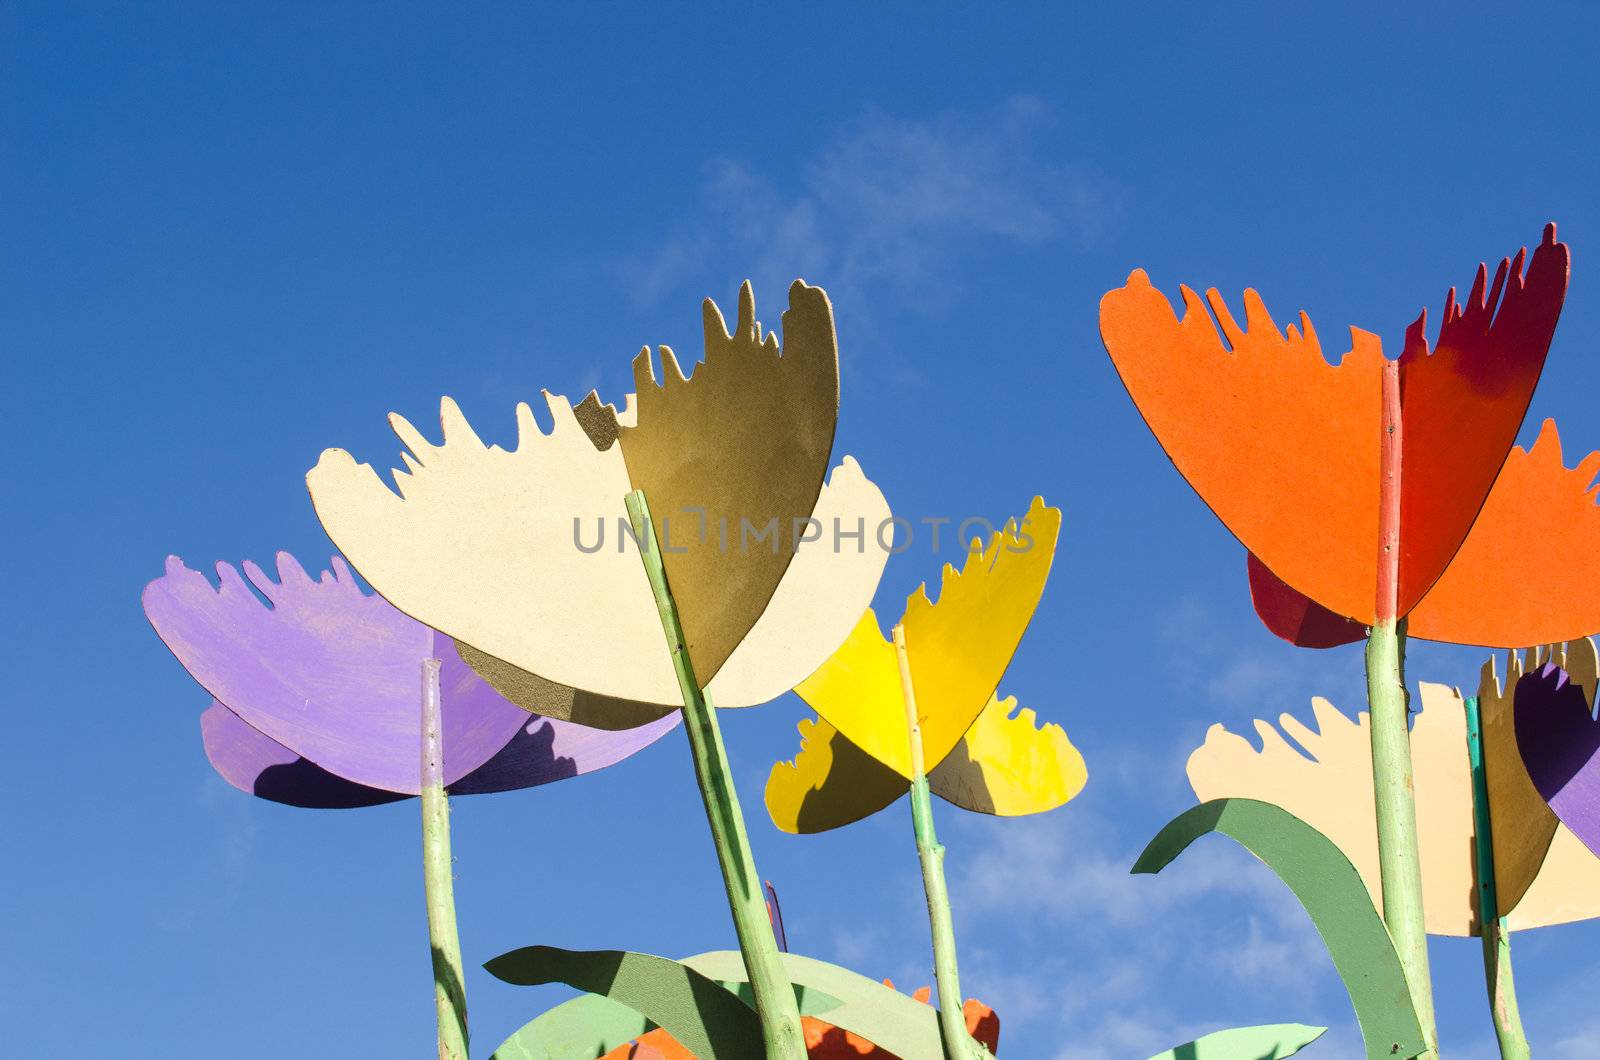 colorful stylized design decor tulips cut from plywood wood board against blue sky background.